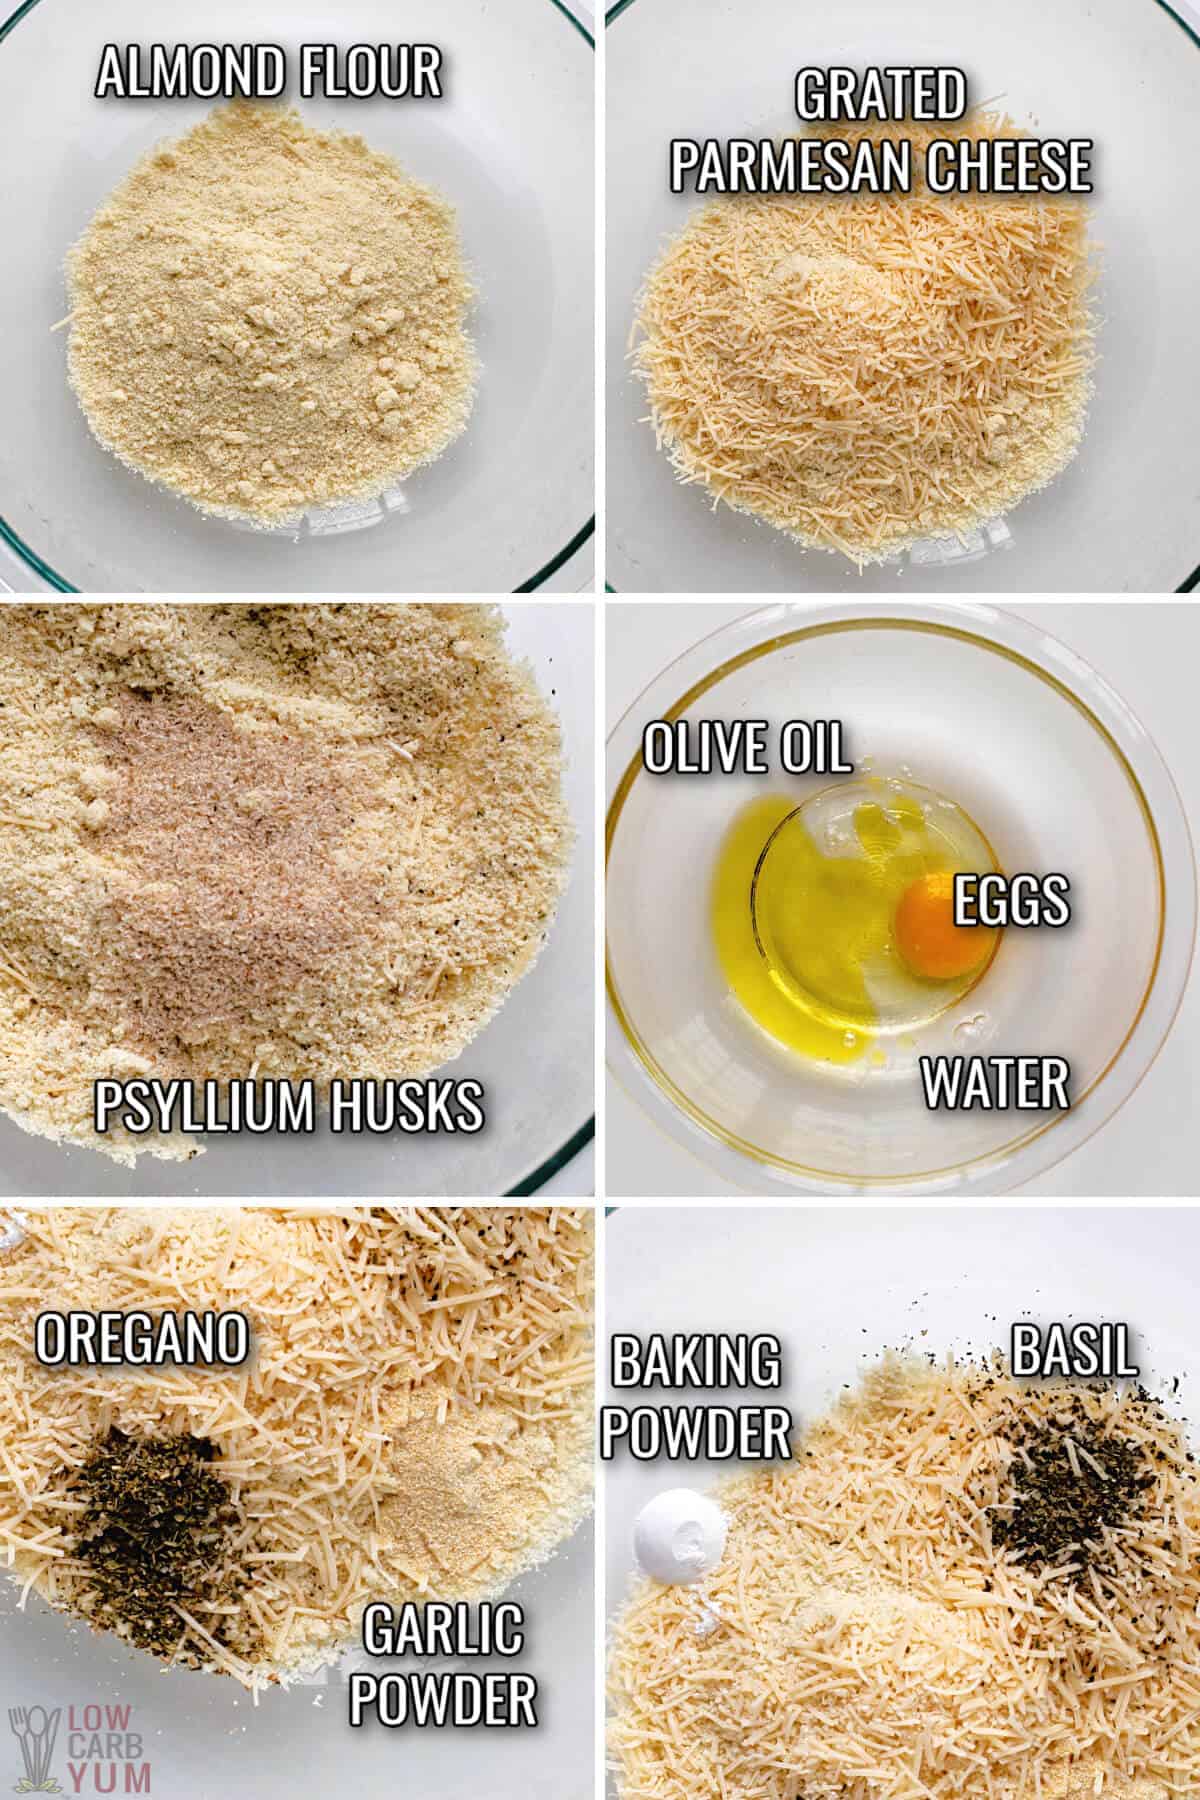 ingredients for the almond flour pizza crust recipe